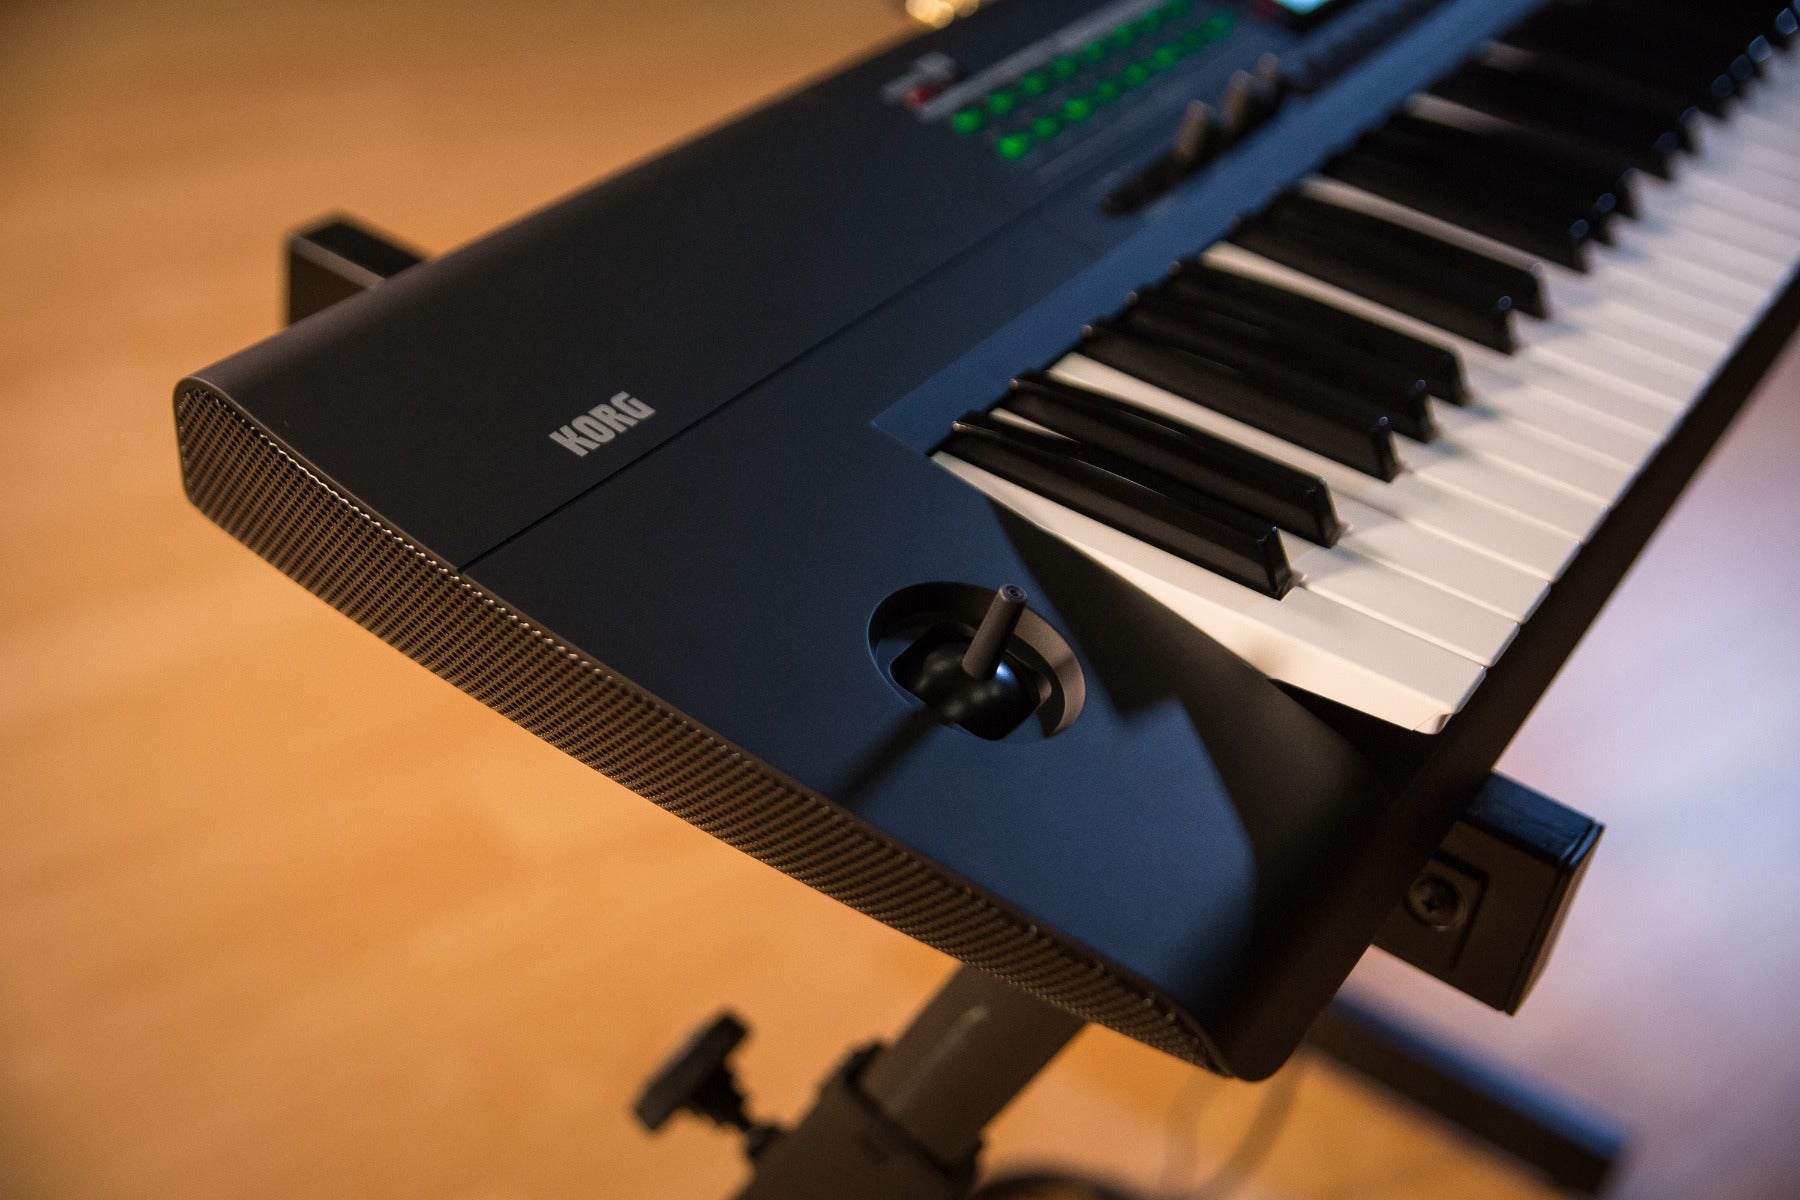 Style shot of the pitch and mod joystick of the KORG i3